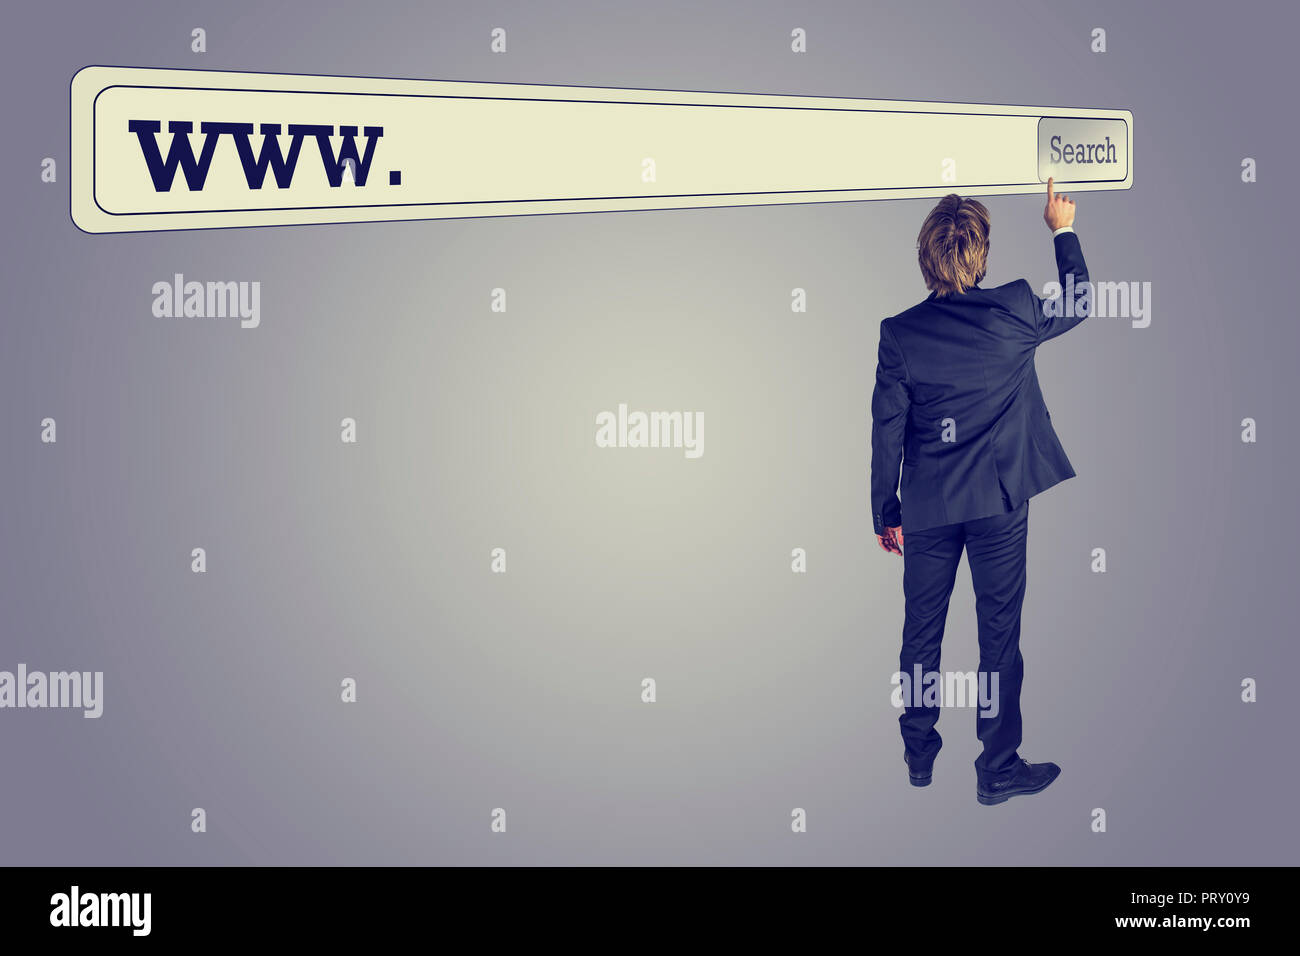 Rear view of a man wearing business suit searching for a web address touching the button of a huge virtual search bar placed above his head on retro g Stock Photo